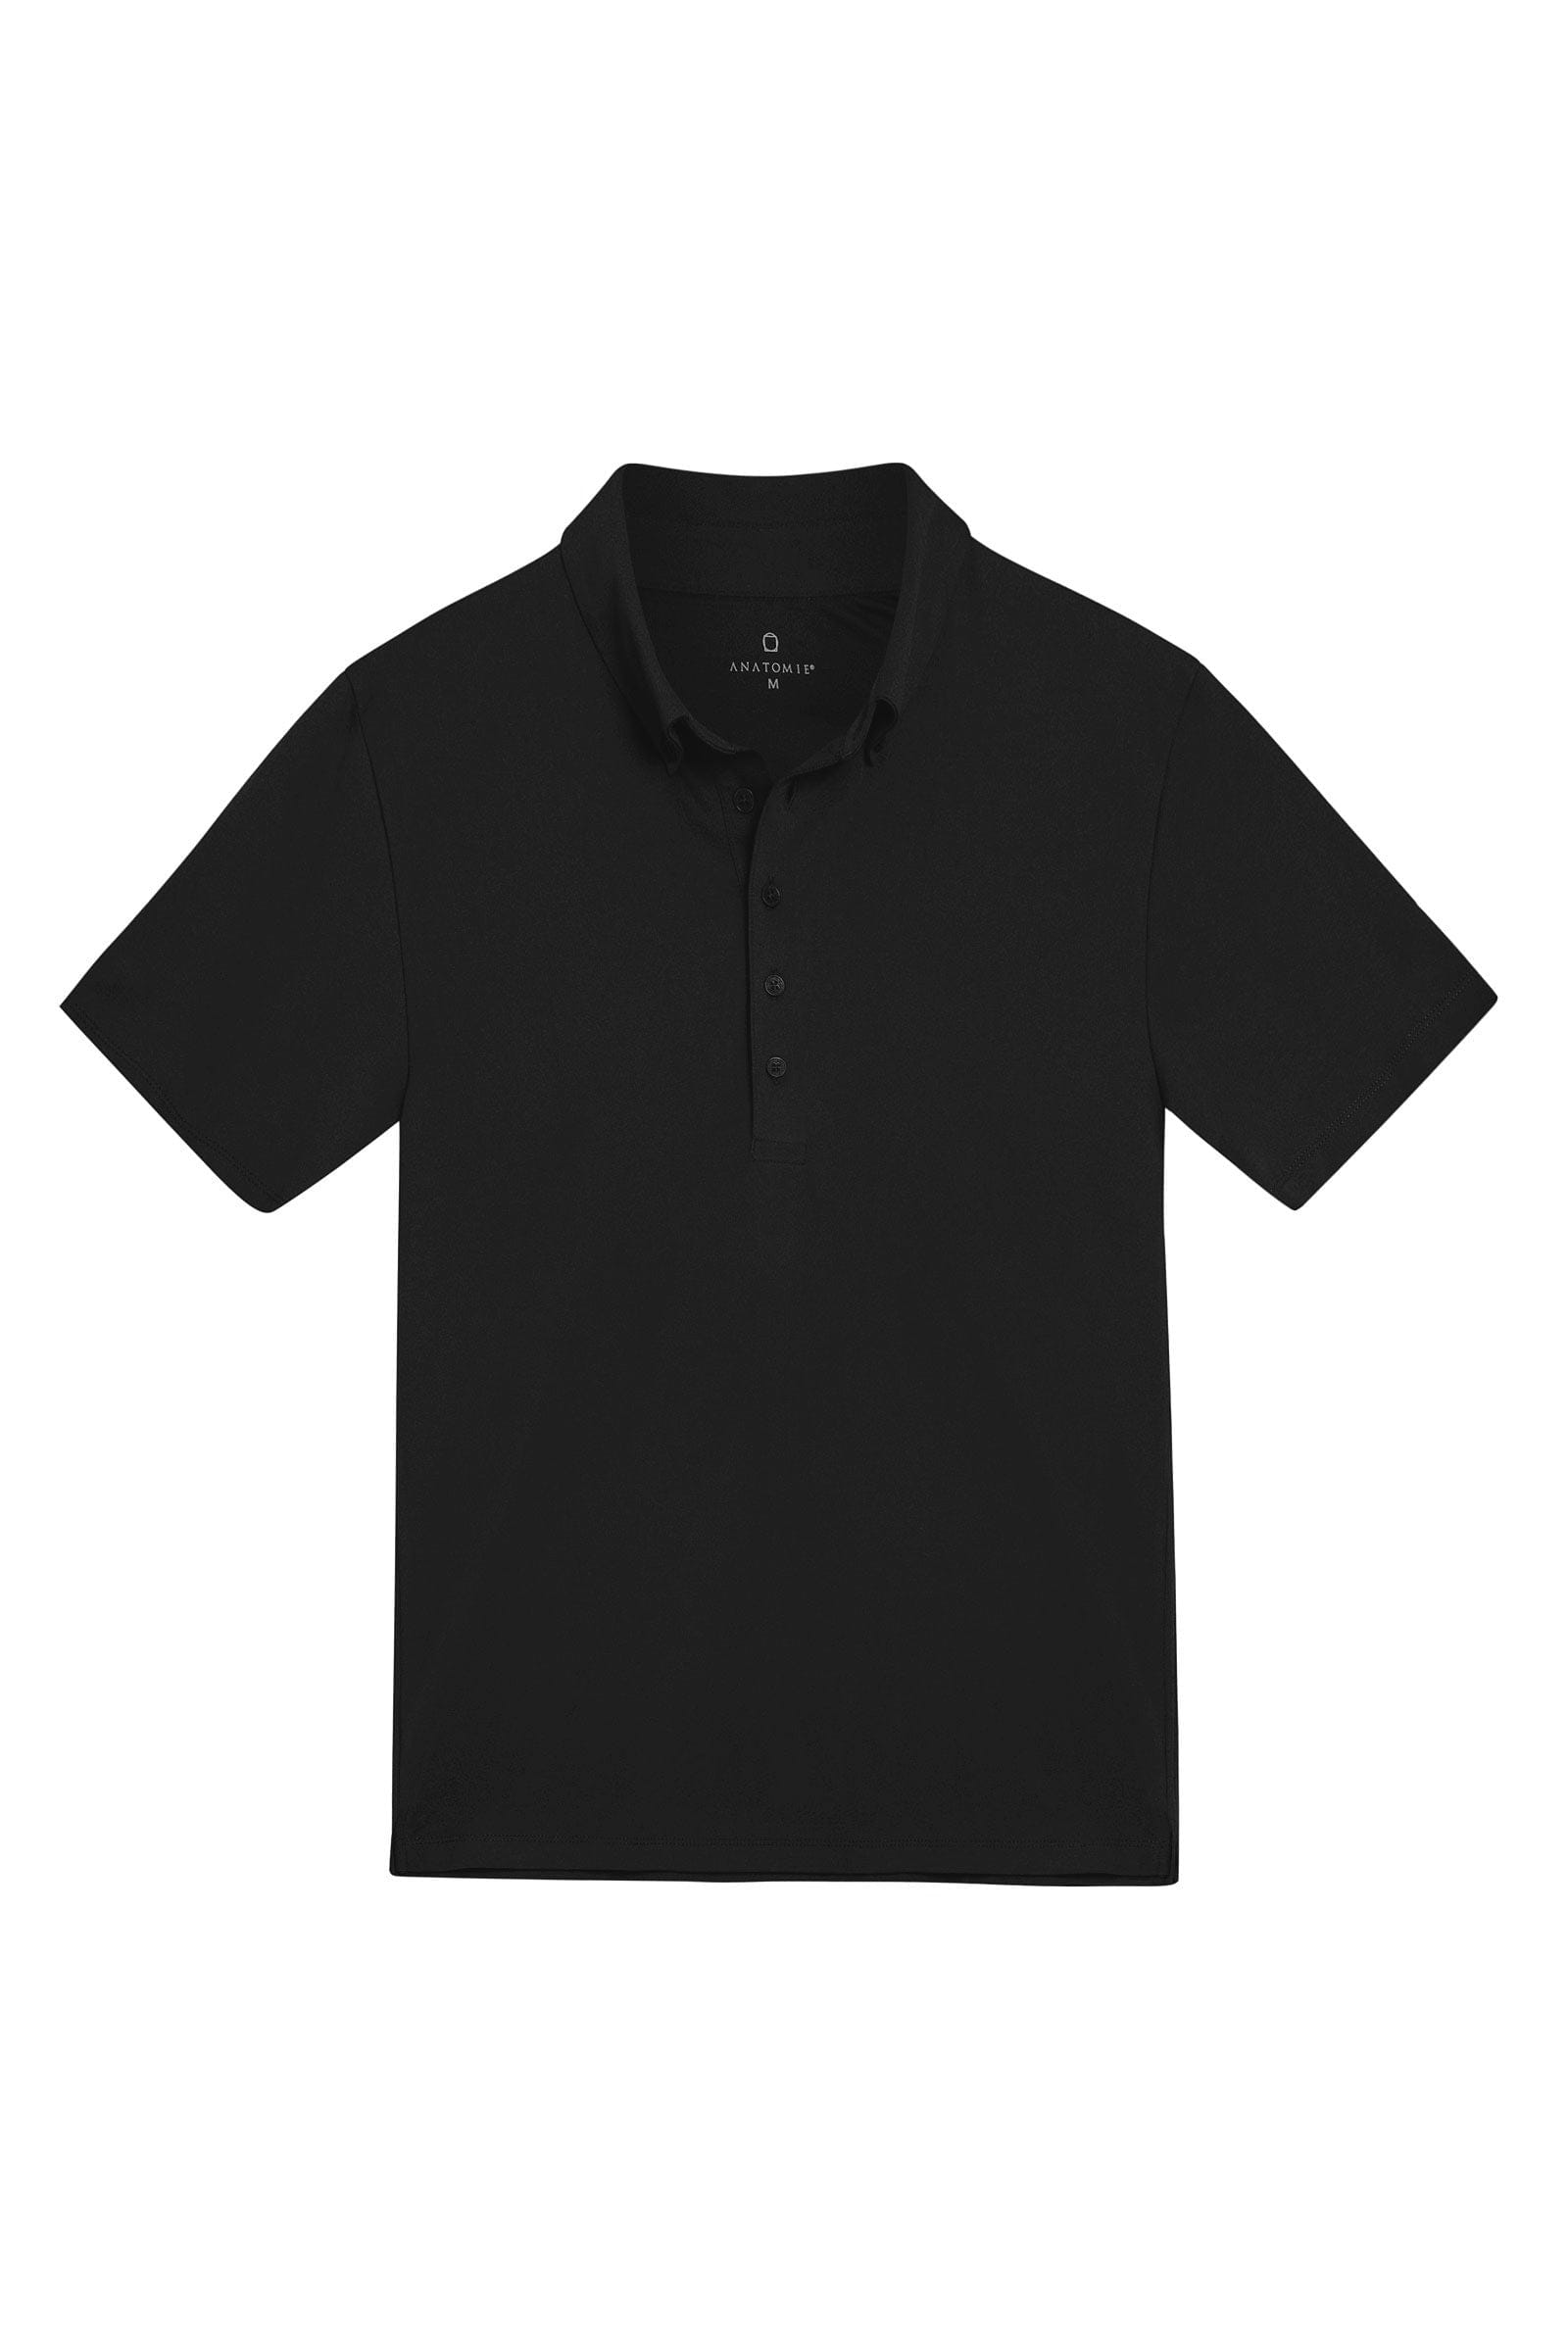 The Best Travel Top. Flat Lay of a Men's Ryan Polo in Black.